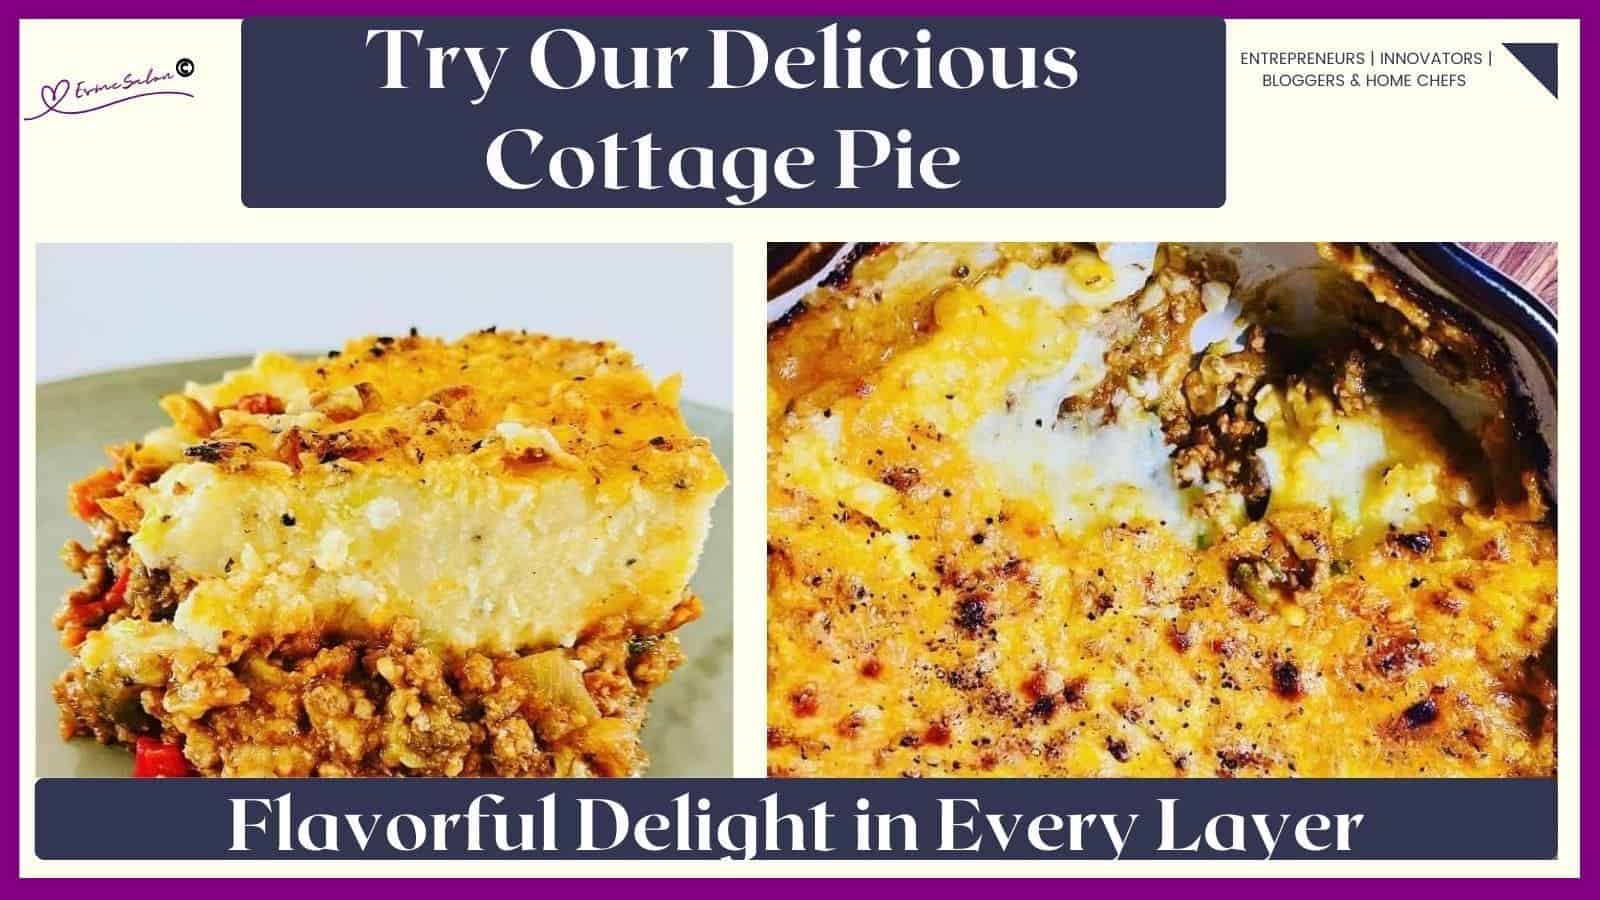 an image of a plate filled with Cottage Pie